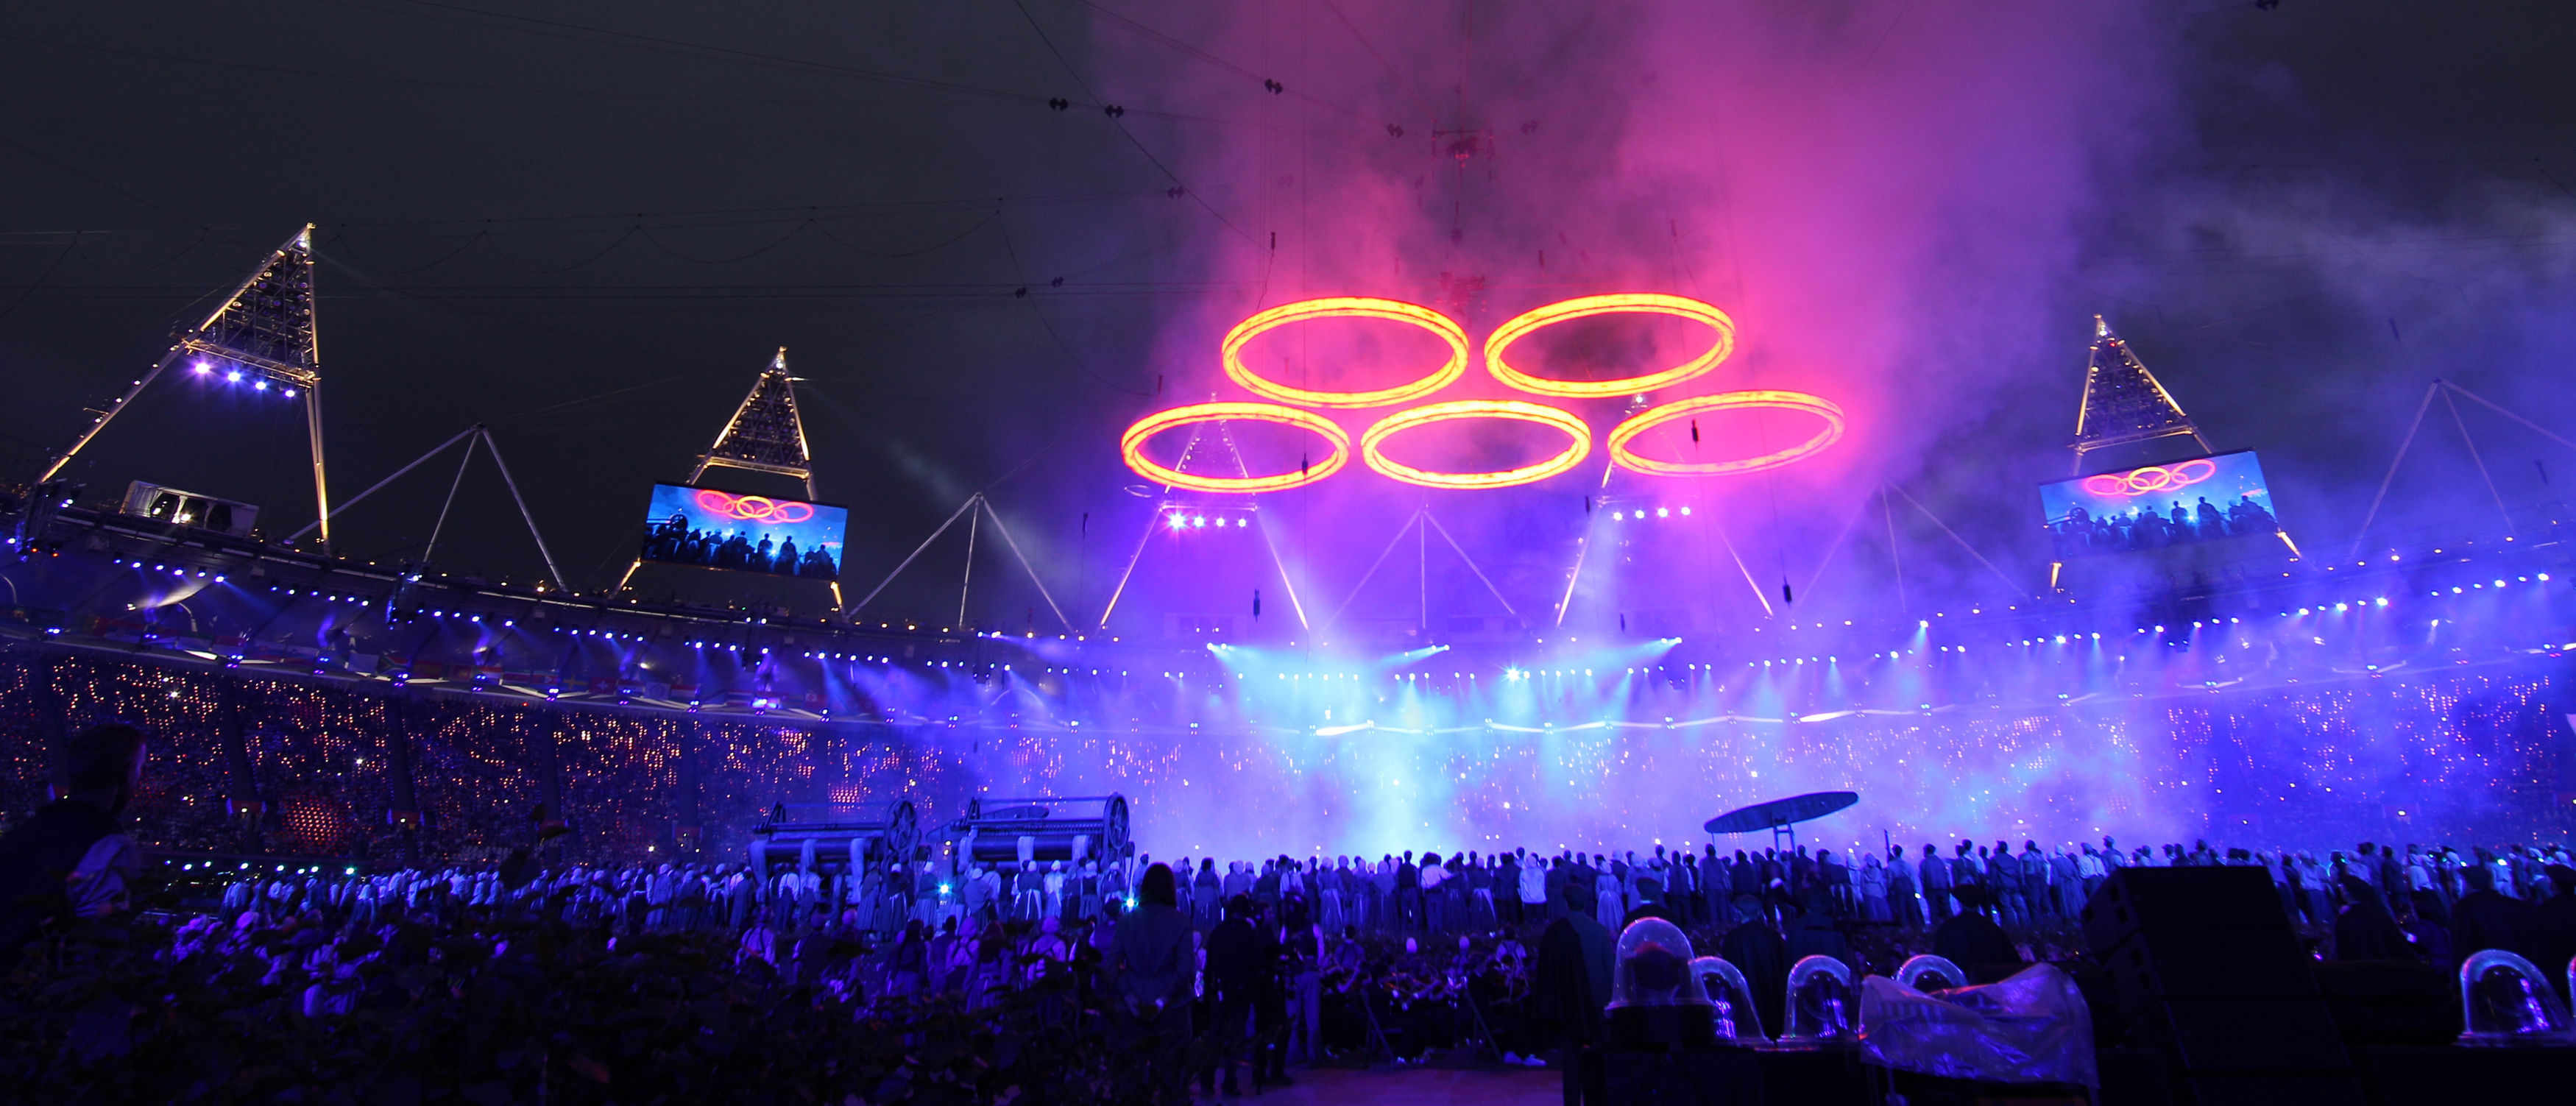 The London Olympic Games 2012 opening ceremony